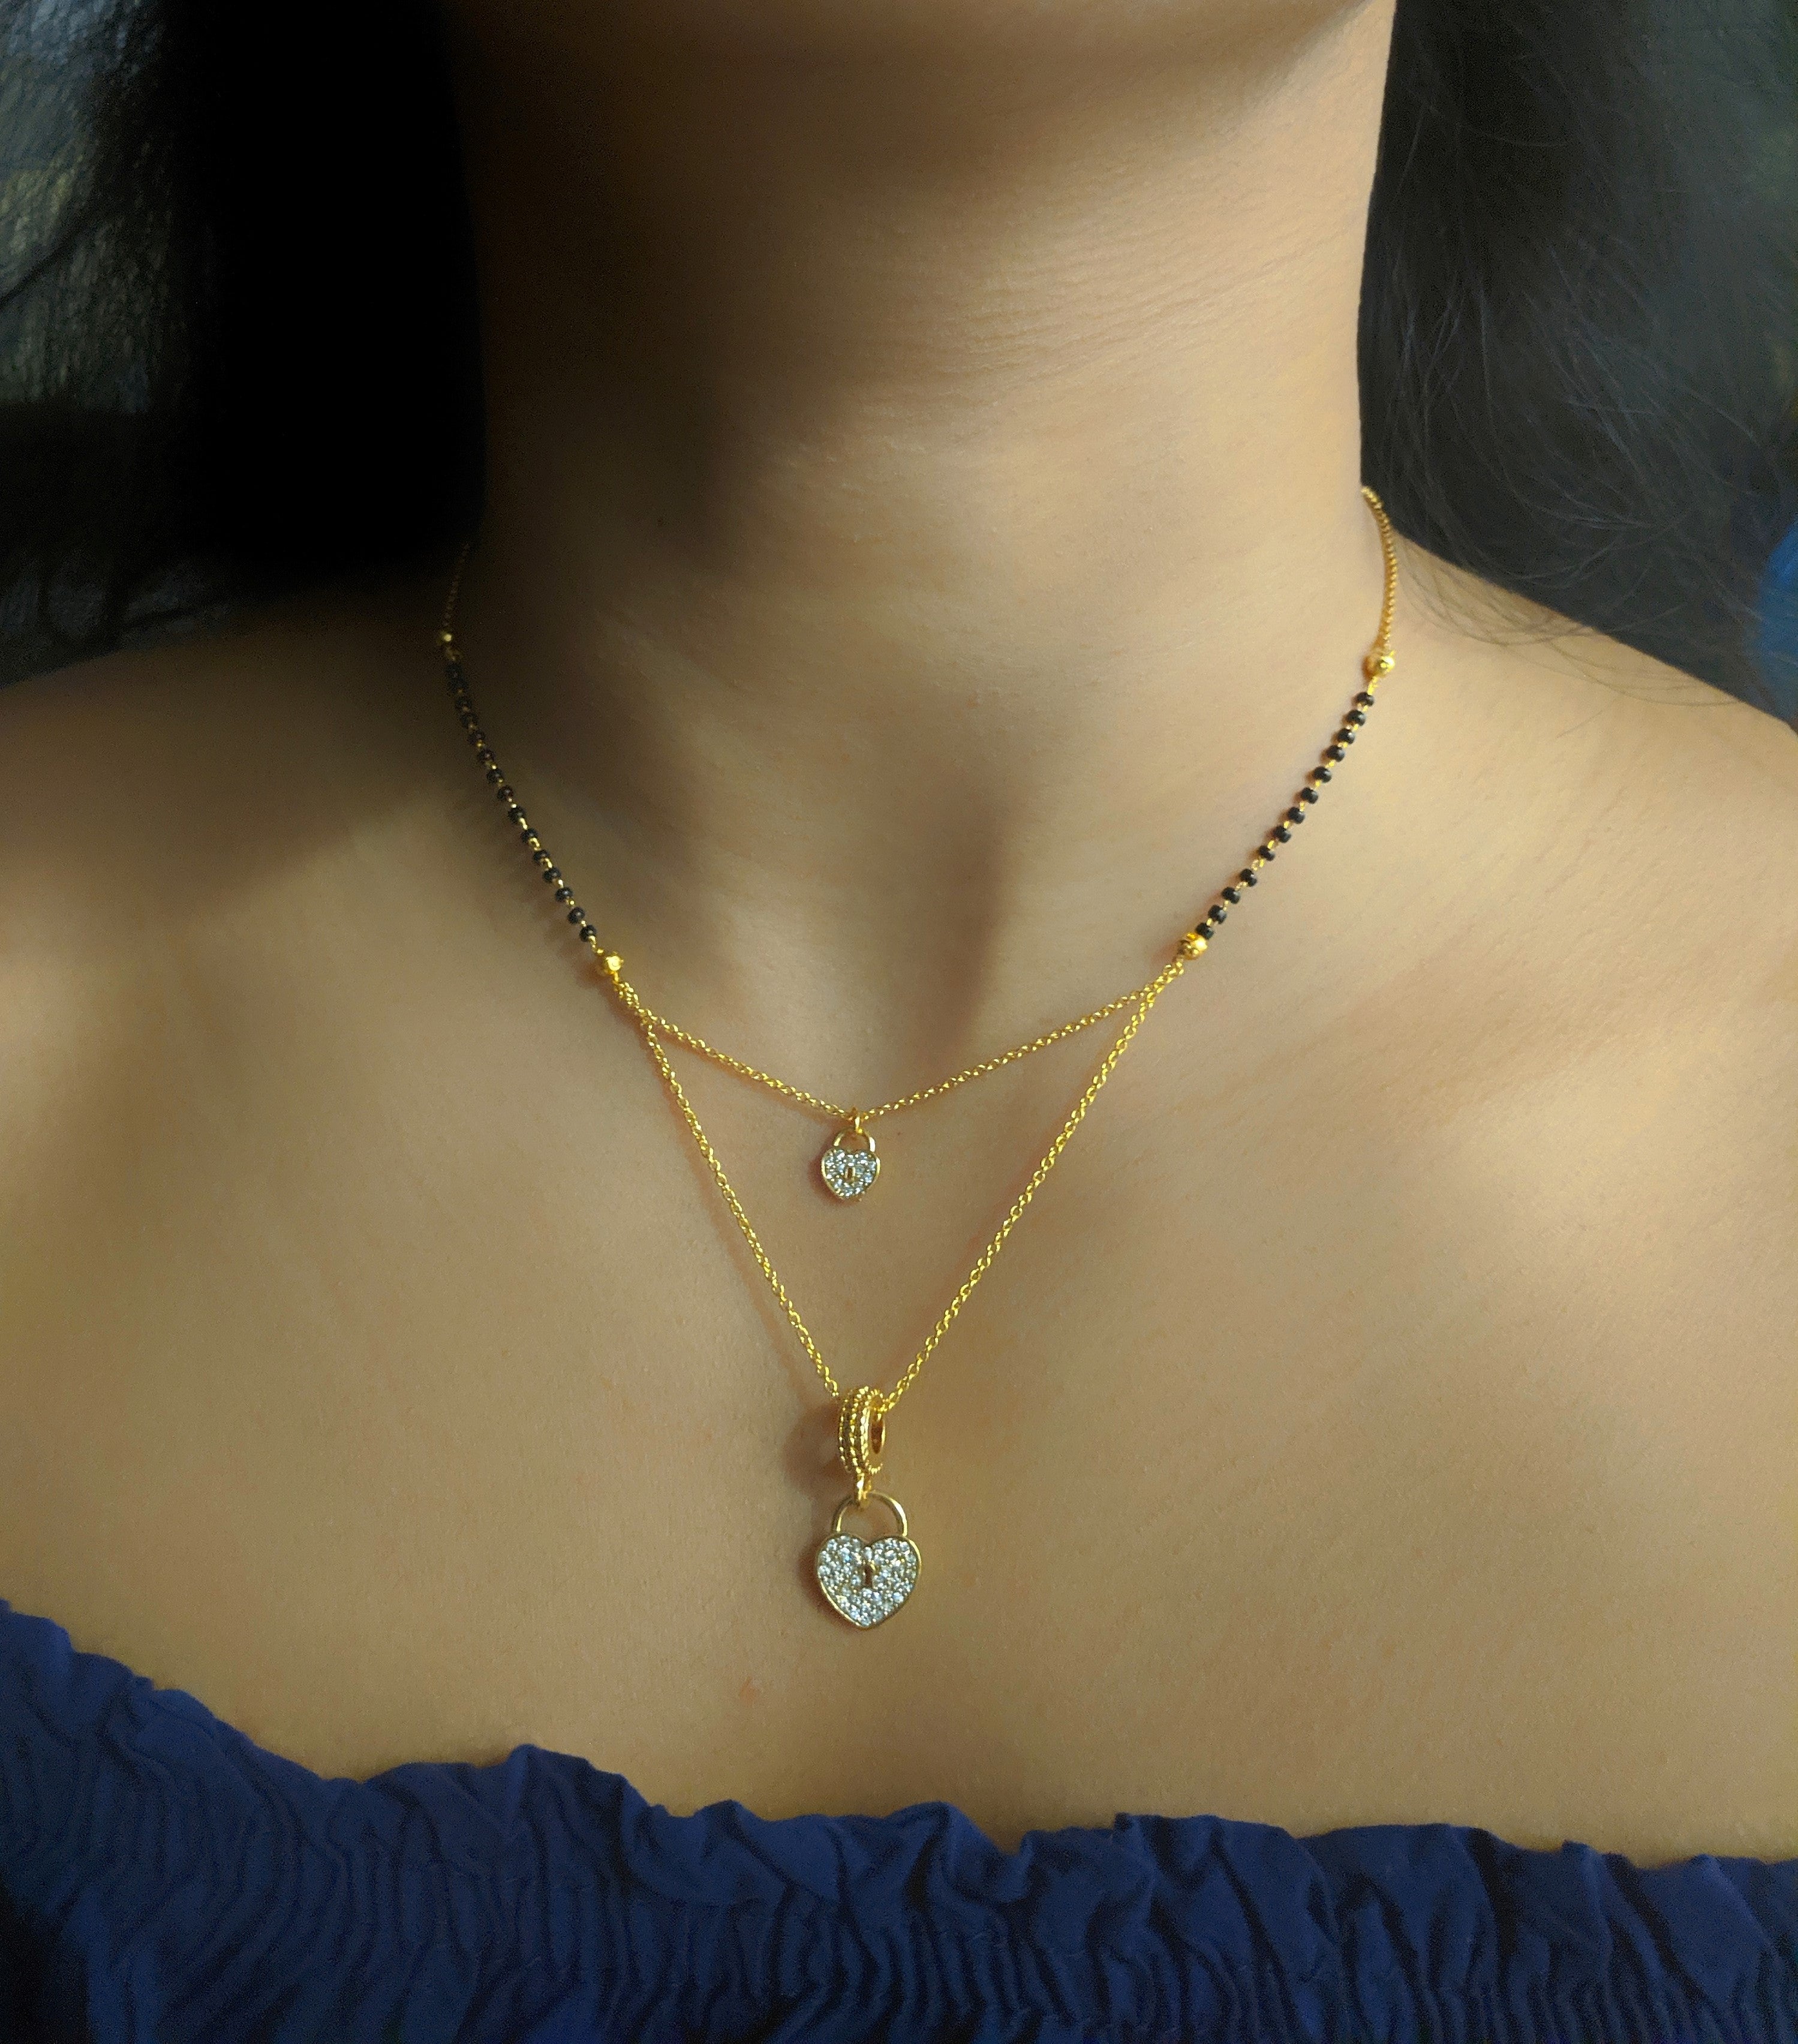 image for Short Mangalsutra Designs Gold Plated Latest Diamond Heart Locket 2 Layer Mangalsutra